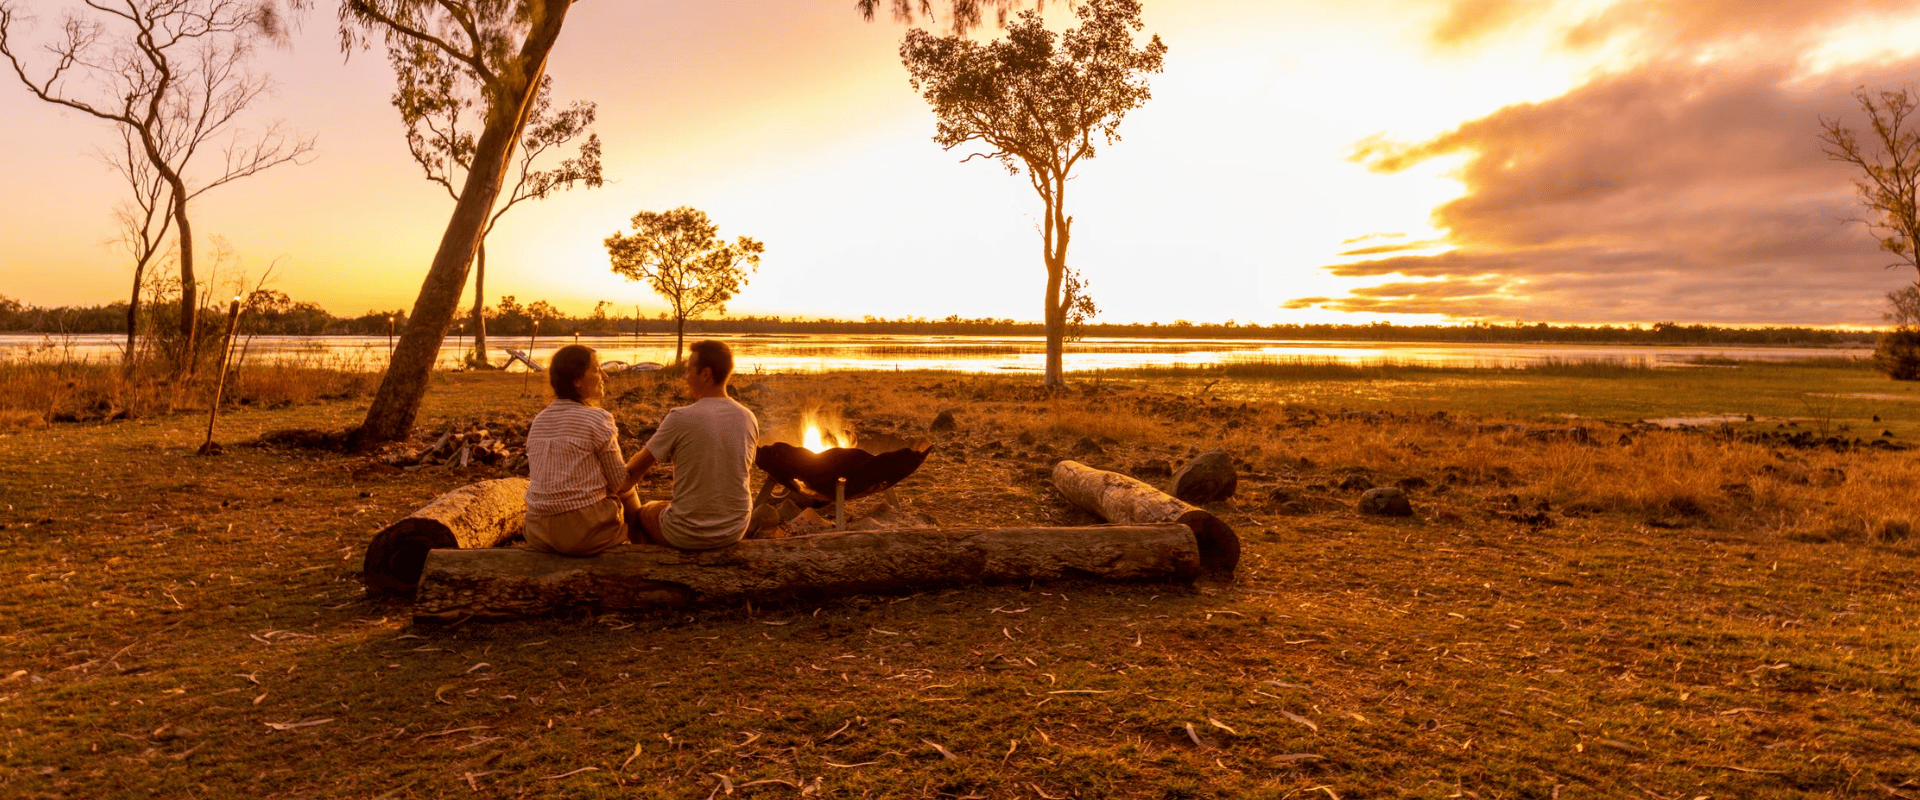 Woman And Man Sitting On Log Watching Sunset In Queensland Outback